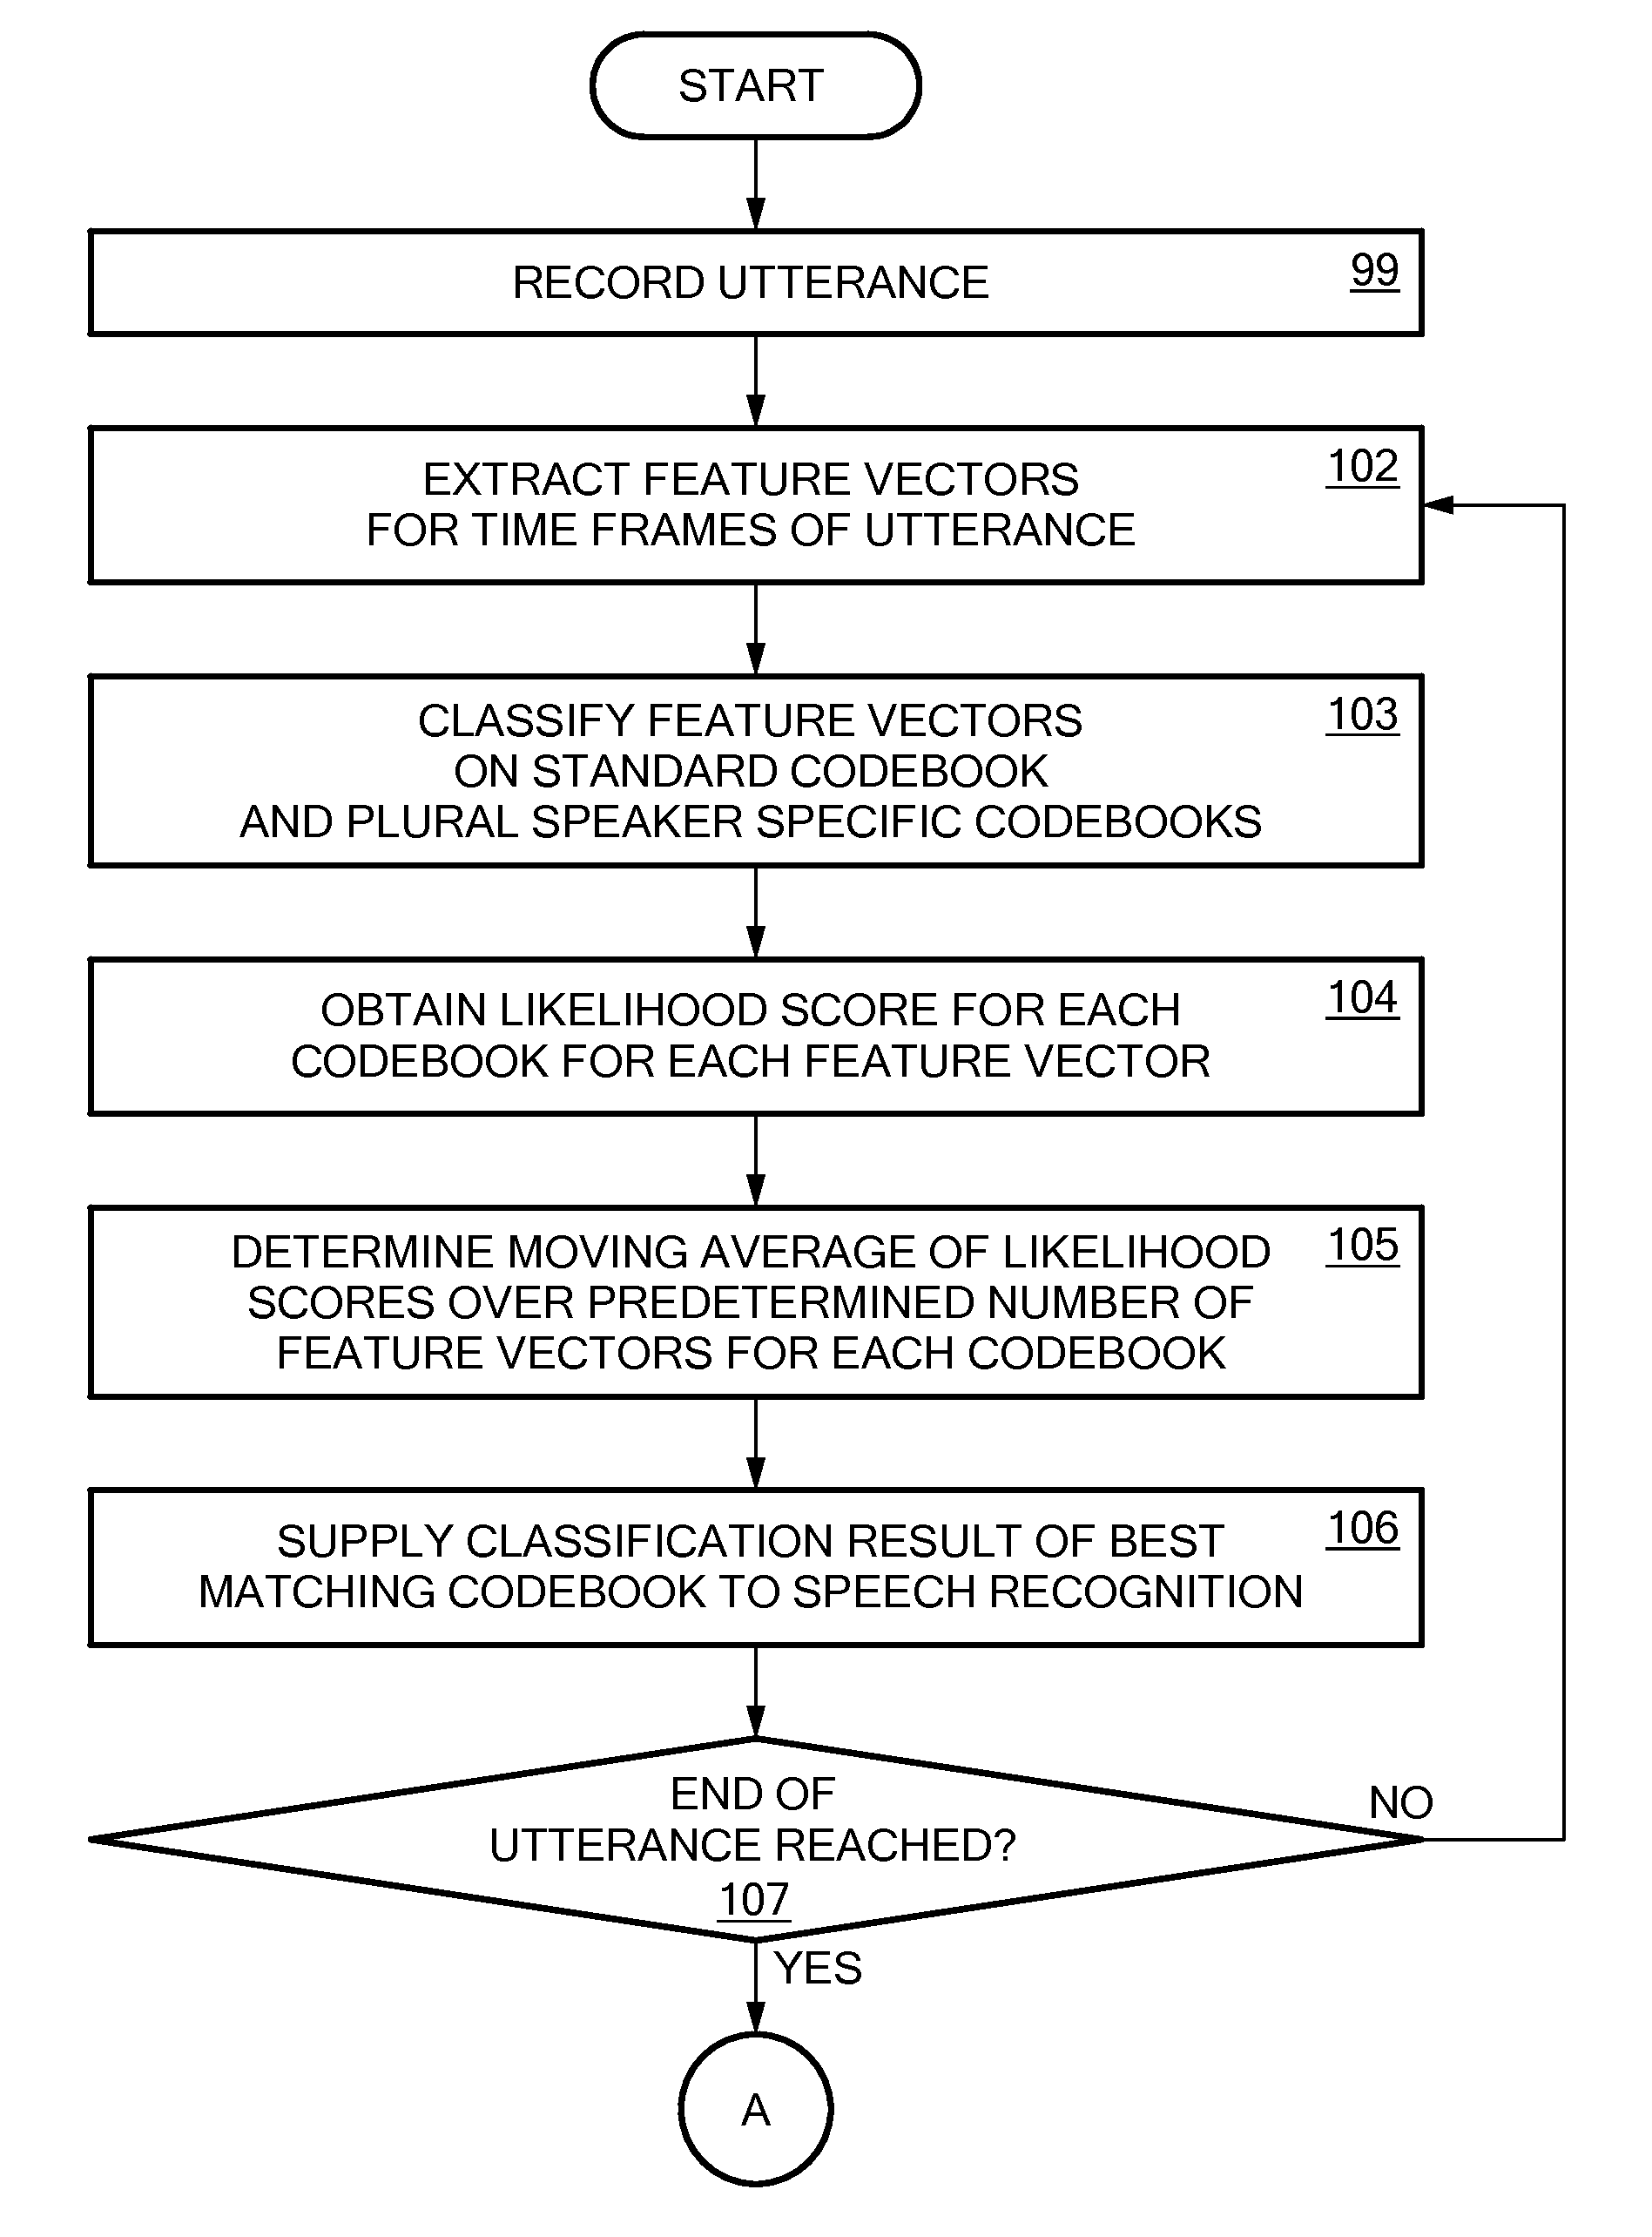 Speaker Recognition in a Speech Recognition System